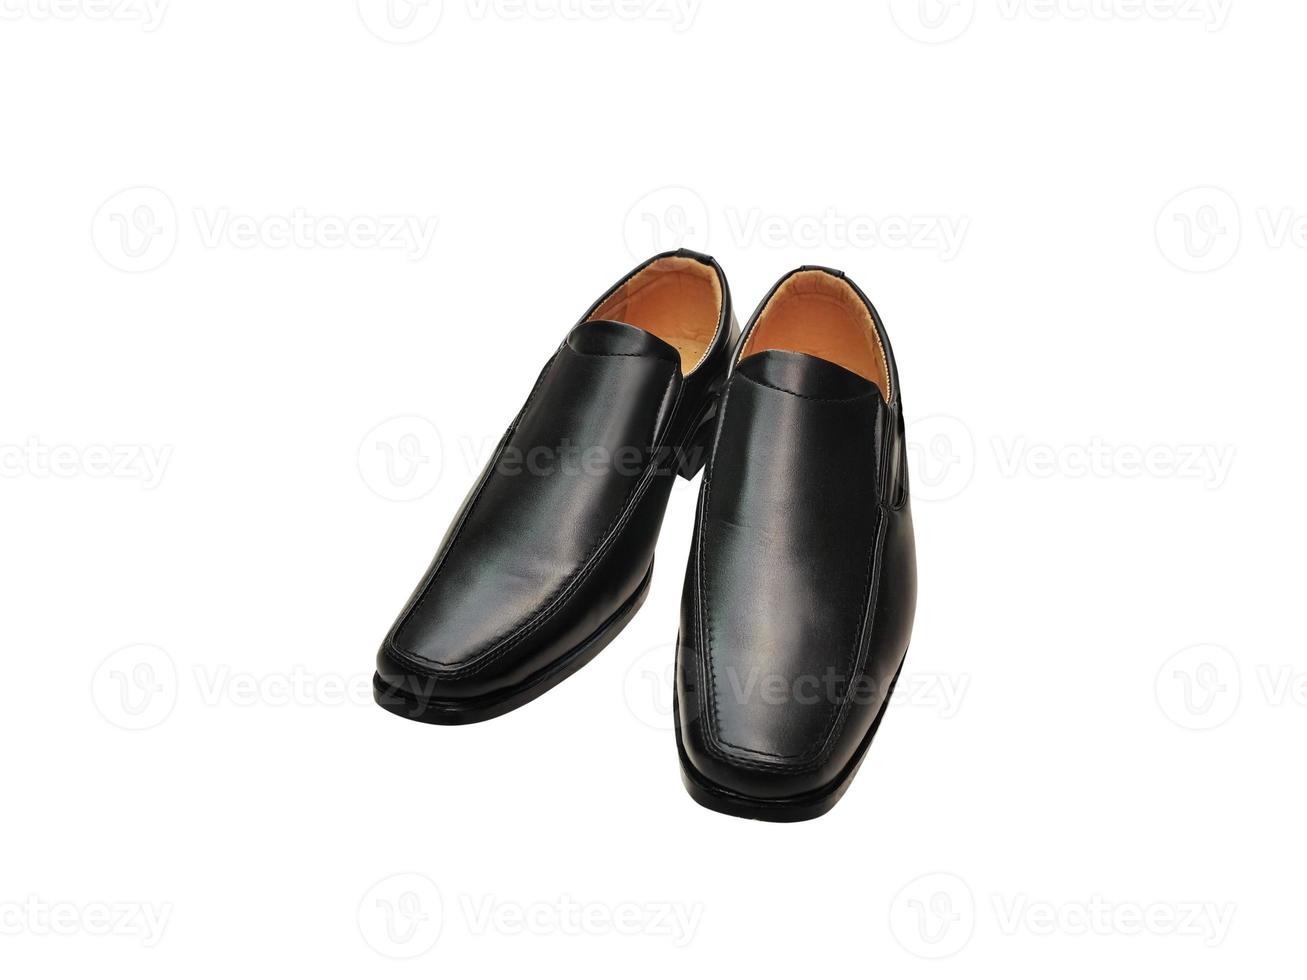 Men's fashion shoes, black, classic design isolated on a white background photo